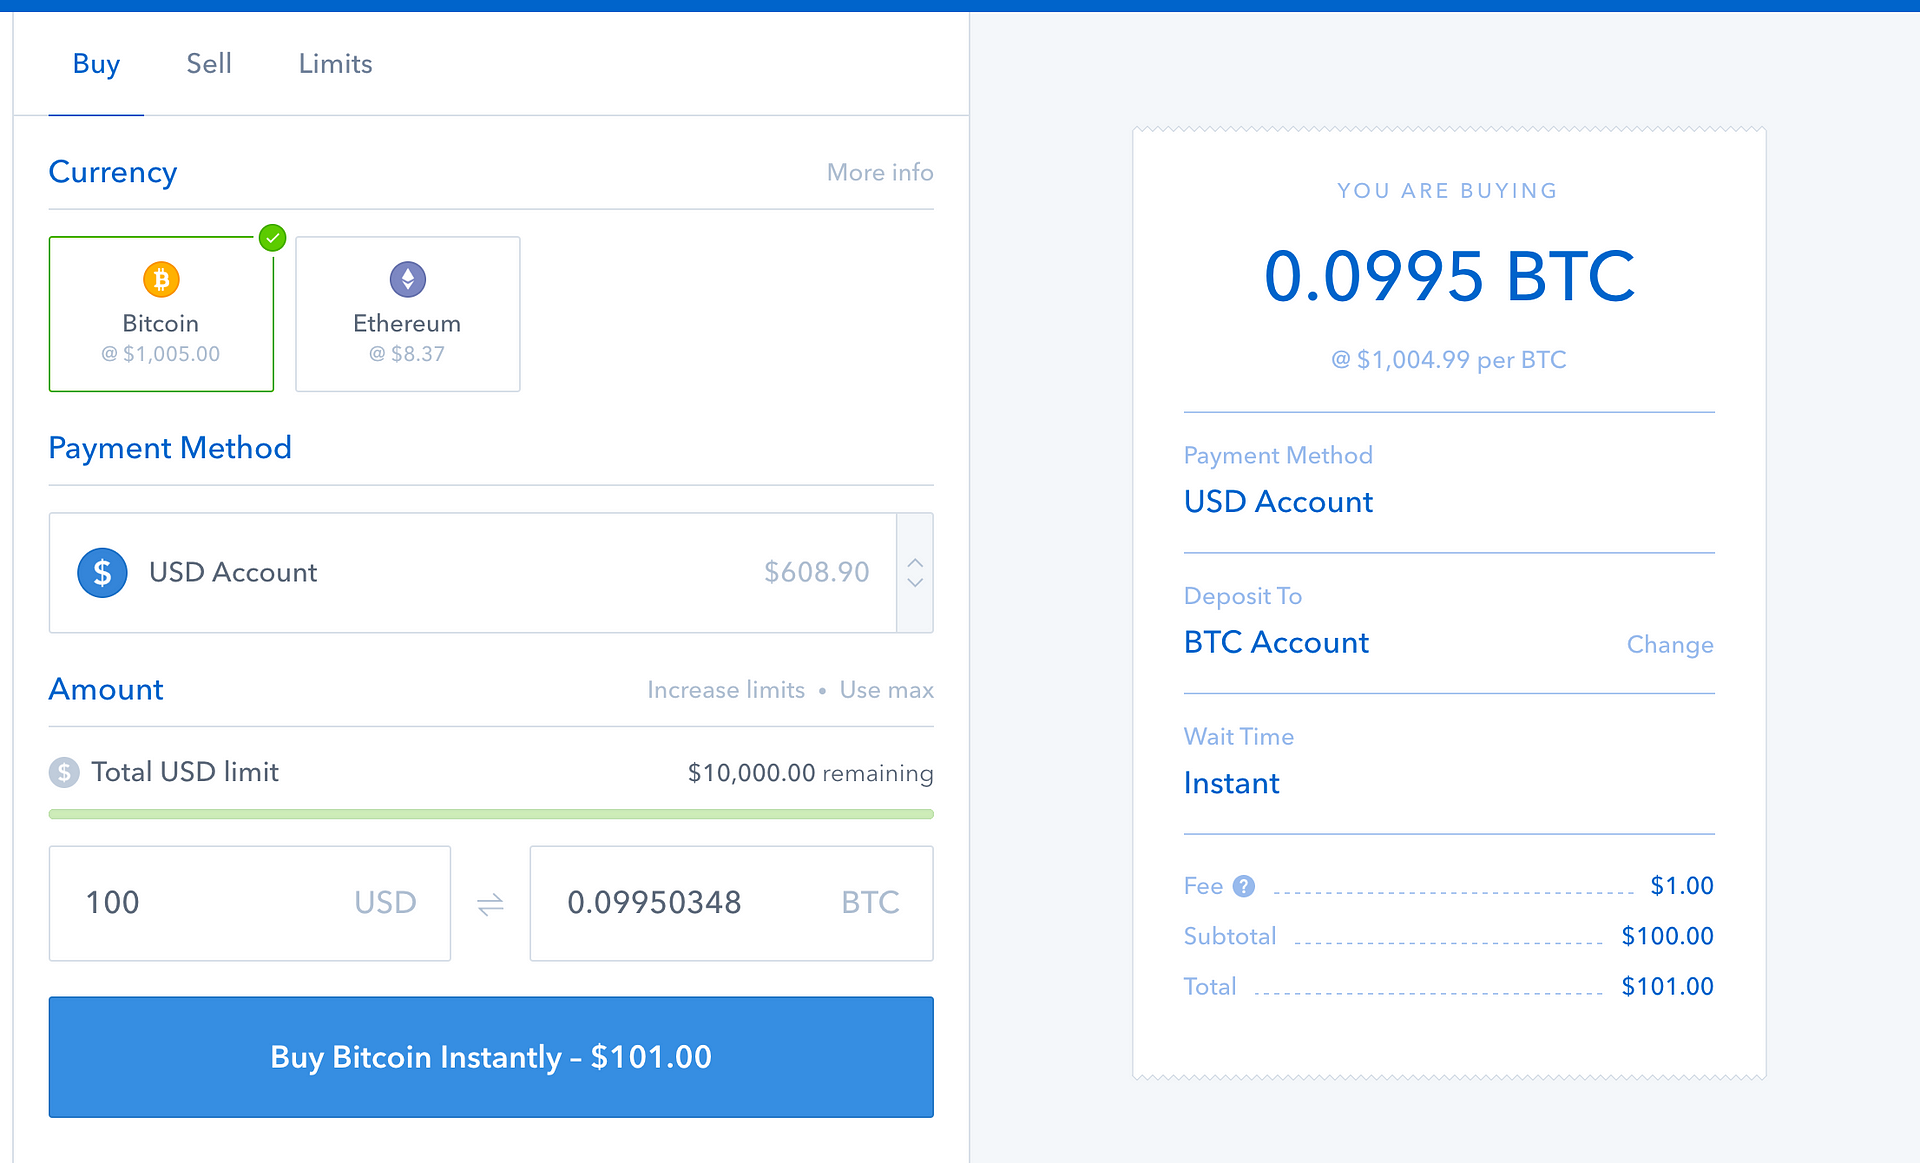 How to Buy Bitcoin on Coinbase, Step by Step (With Photos)